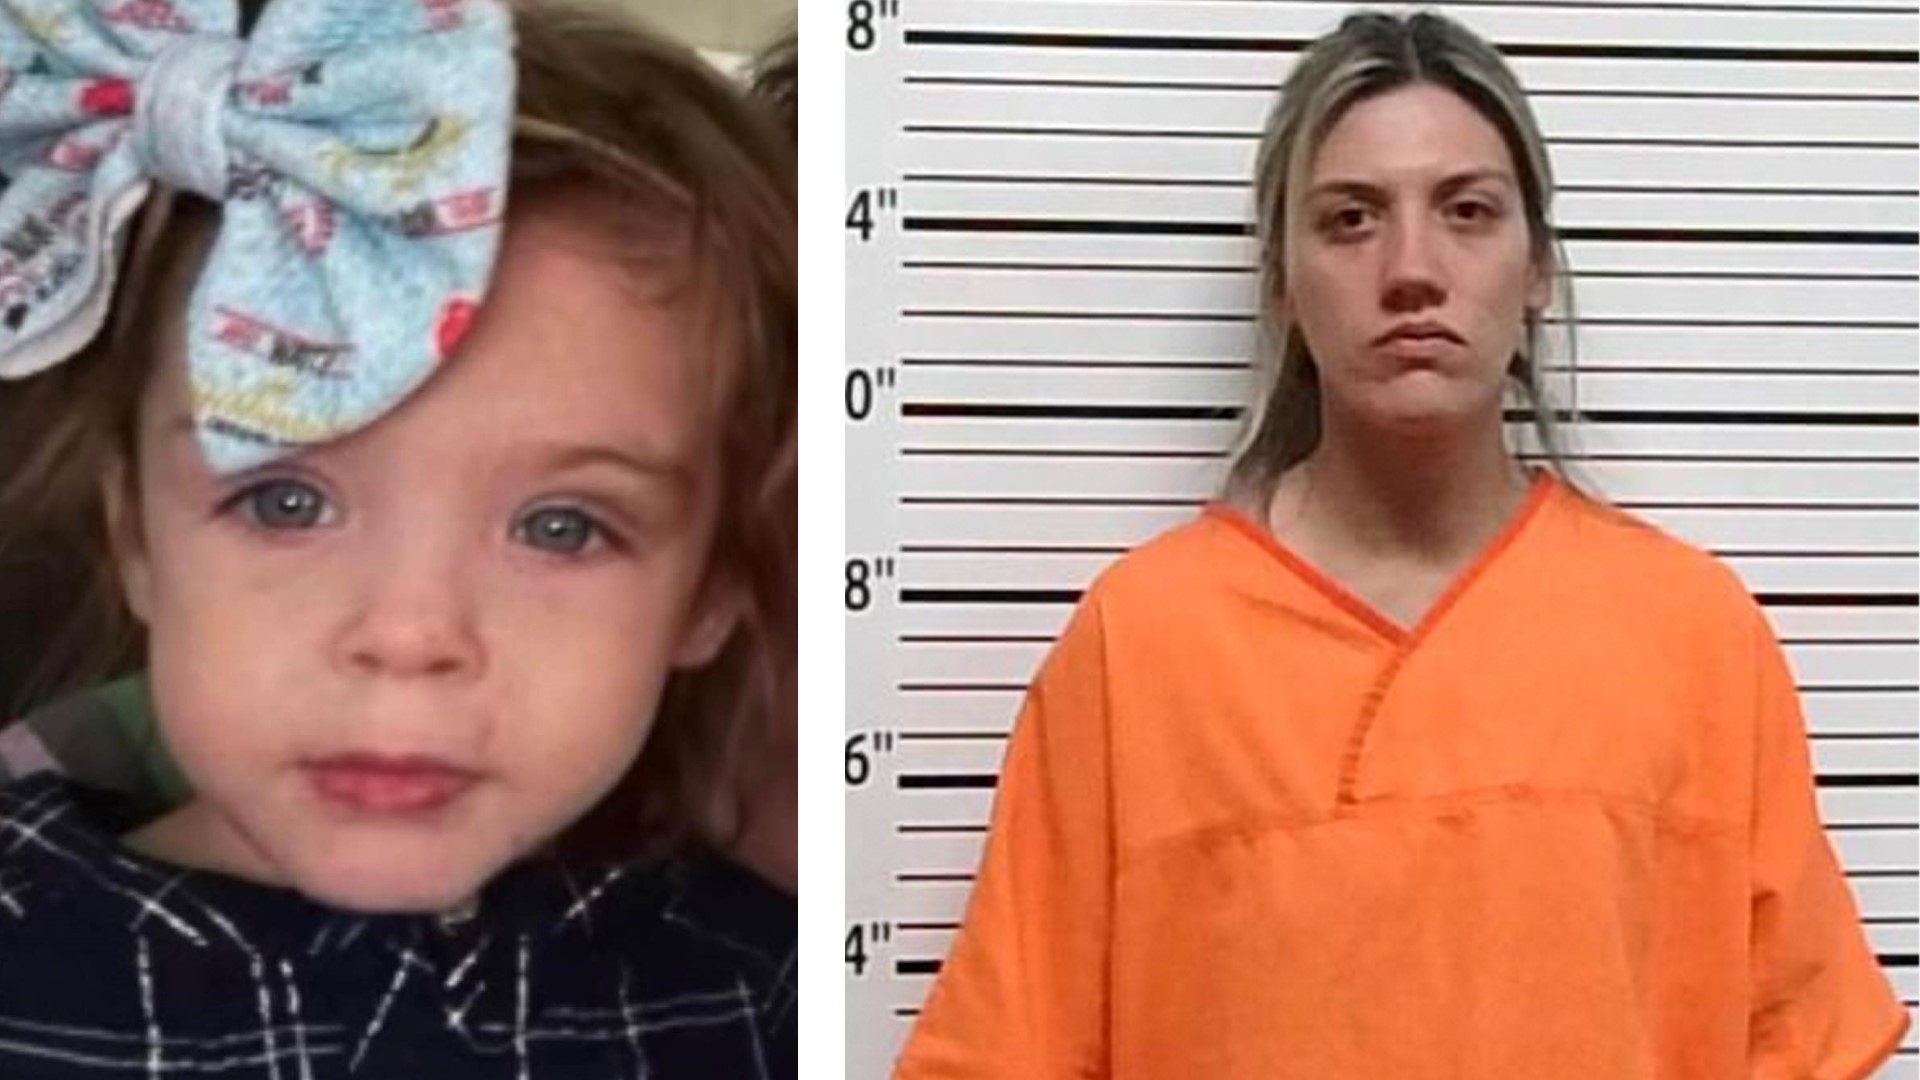 OSBI agents have made an arrest in the case of missing 4-year-old Athena, who is still missing.